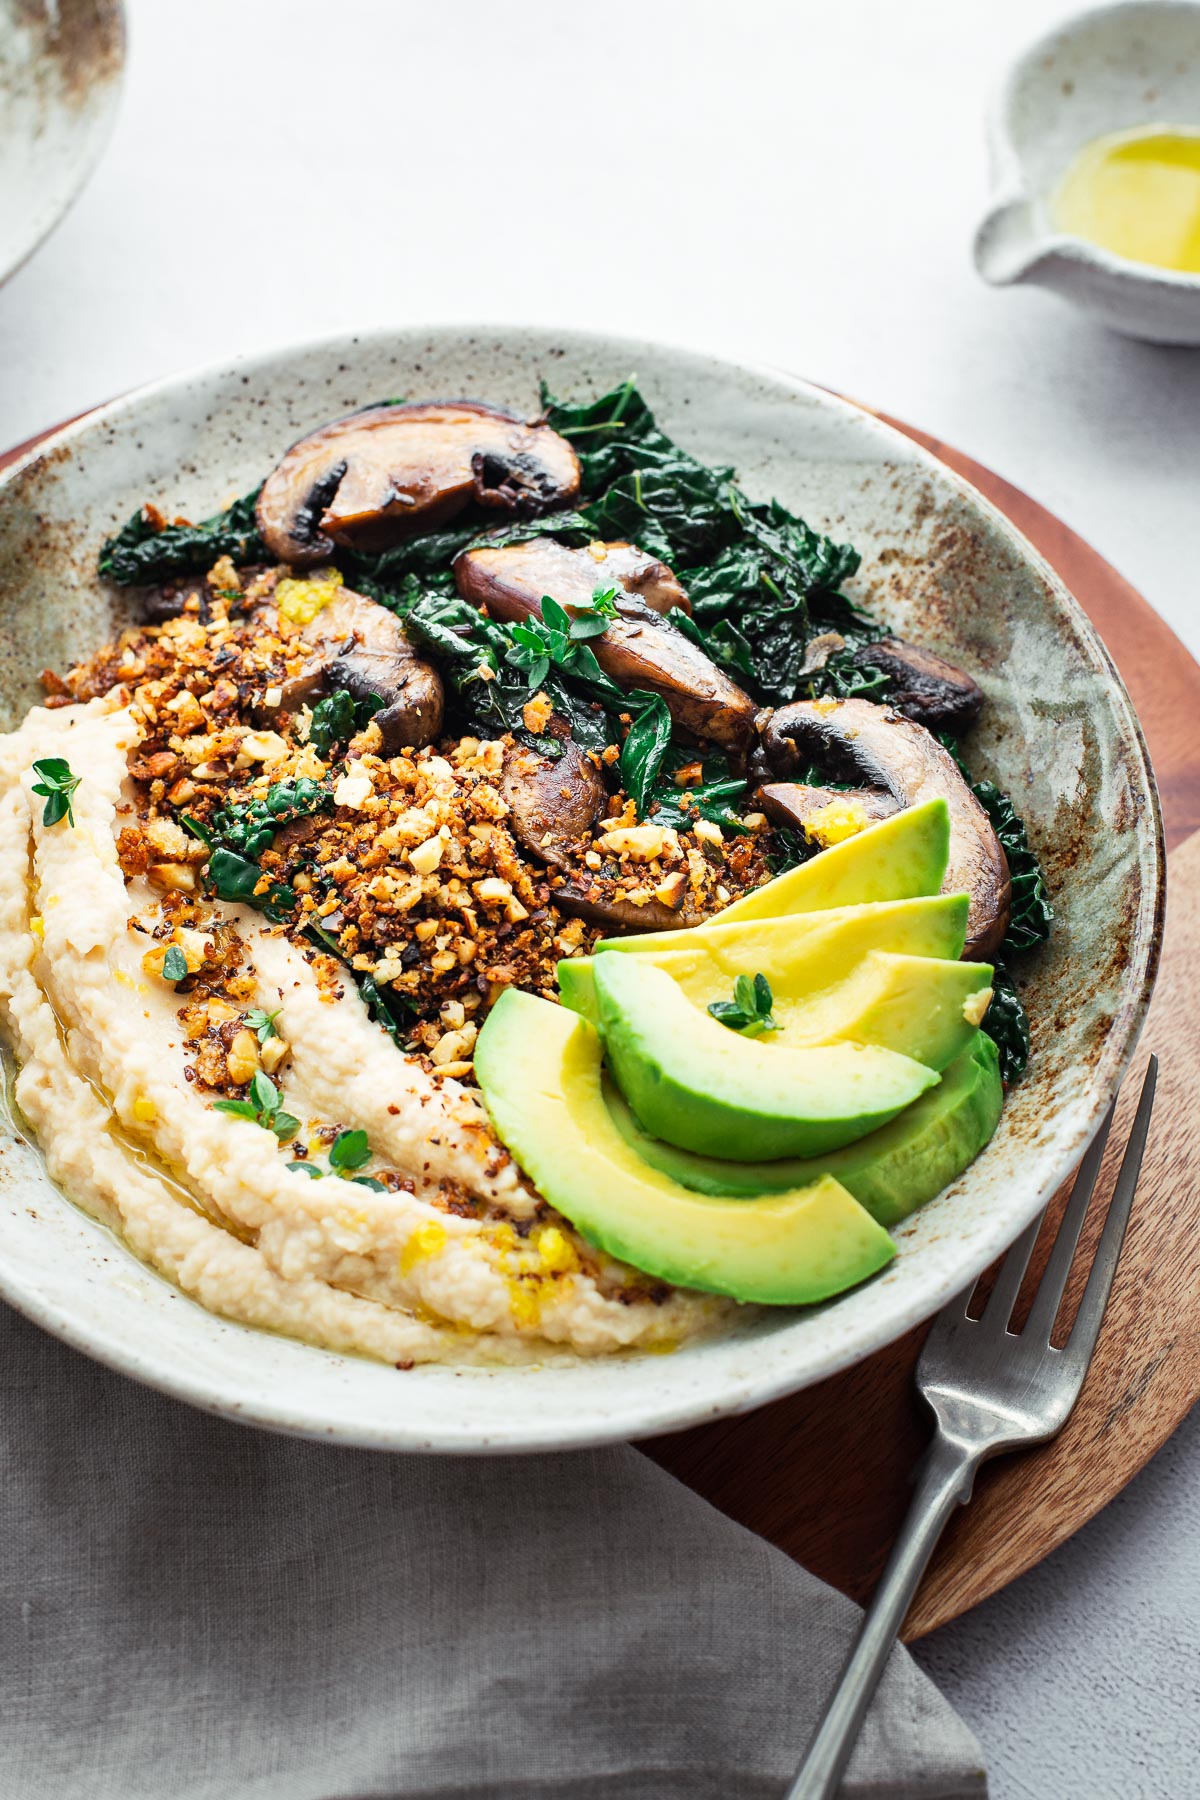 Butter bean mash, crumbs, sautéed mushrooms and kale with sliced avocado.